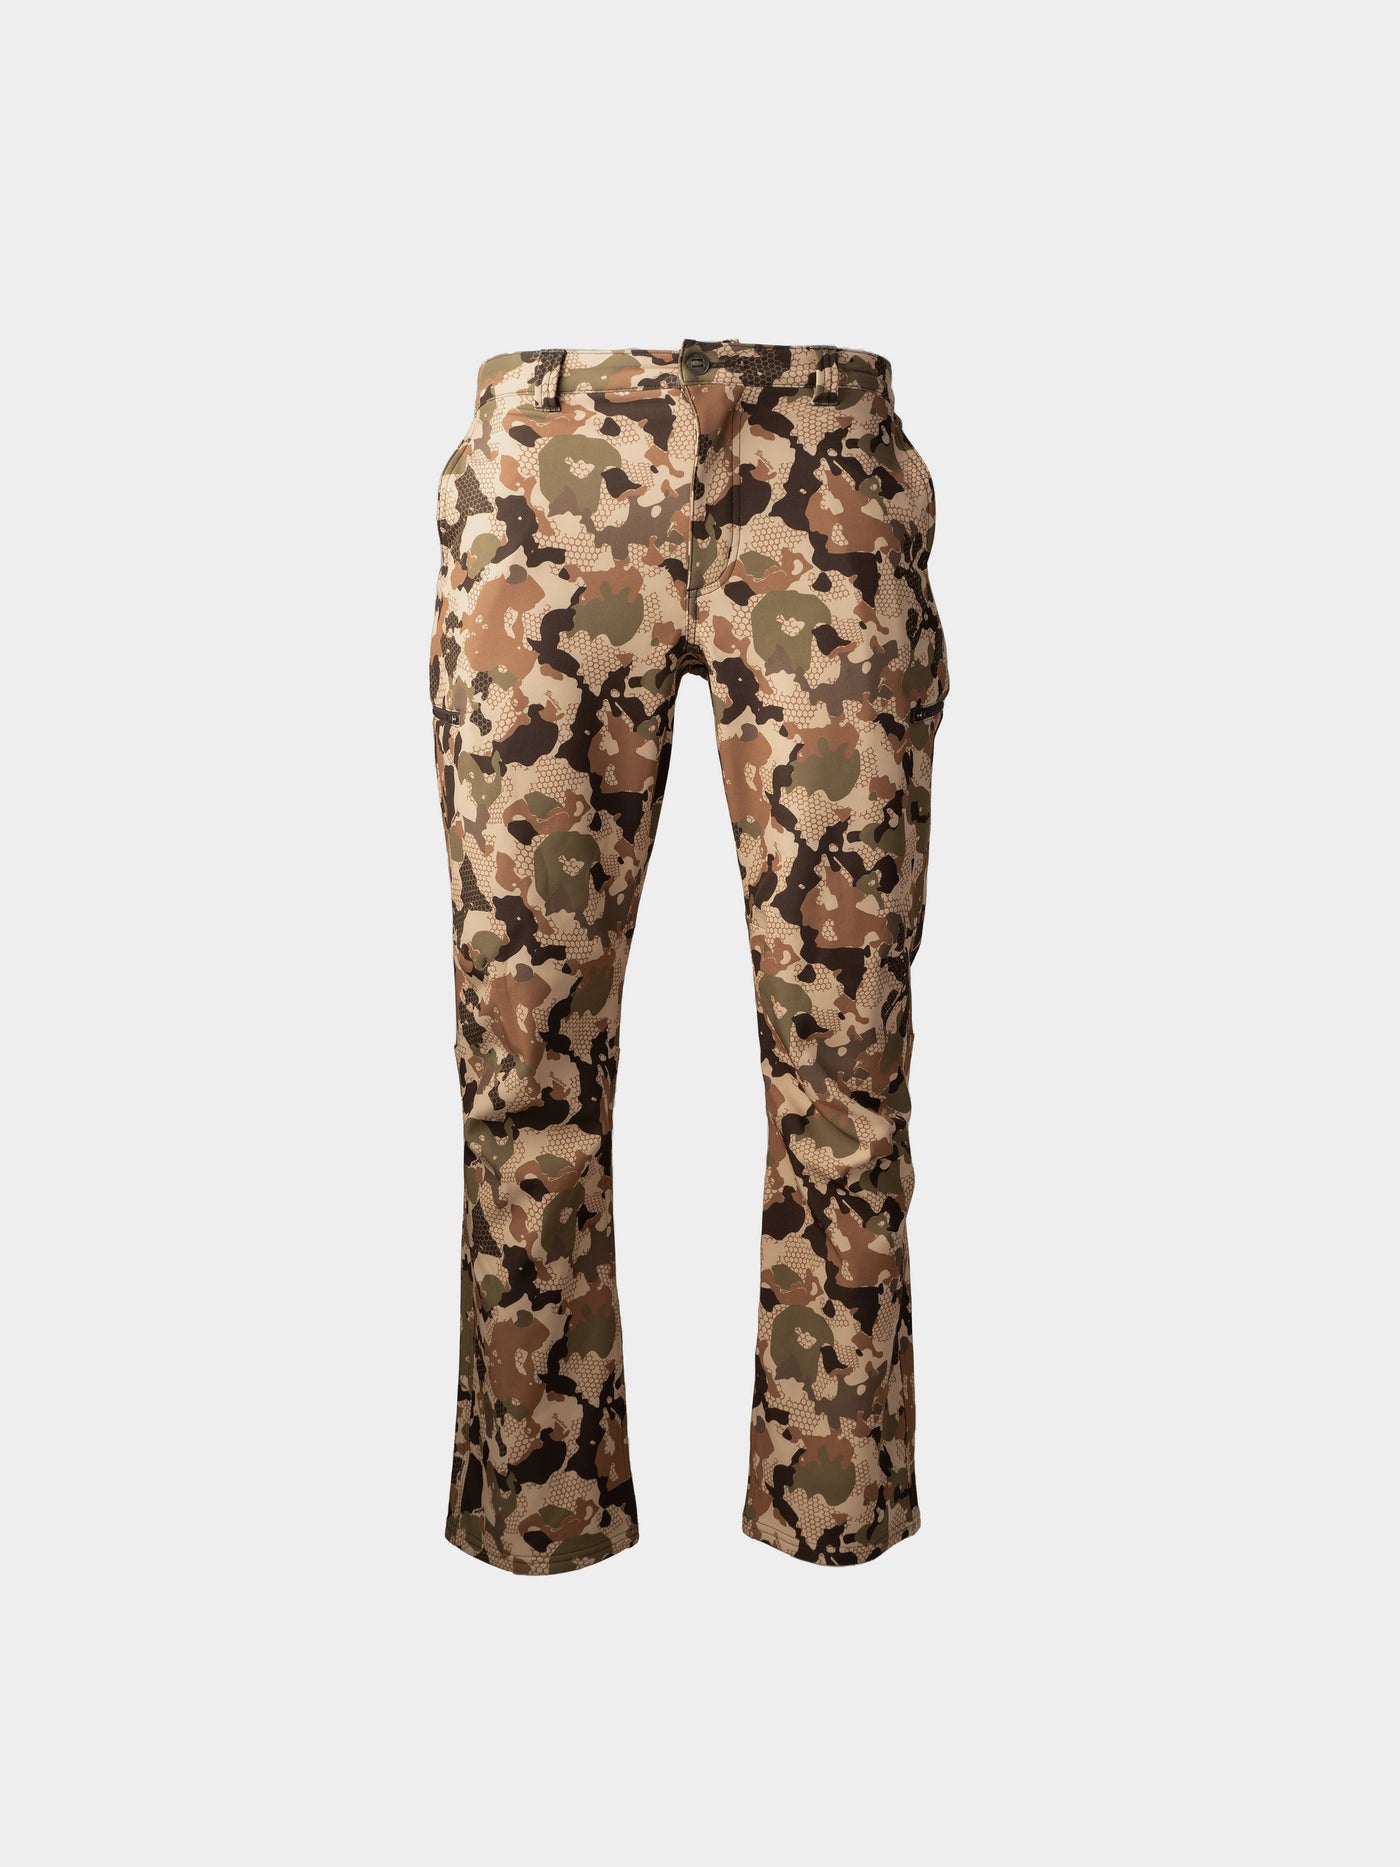 Contact Softshell Pant - Wetland Camouflage